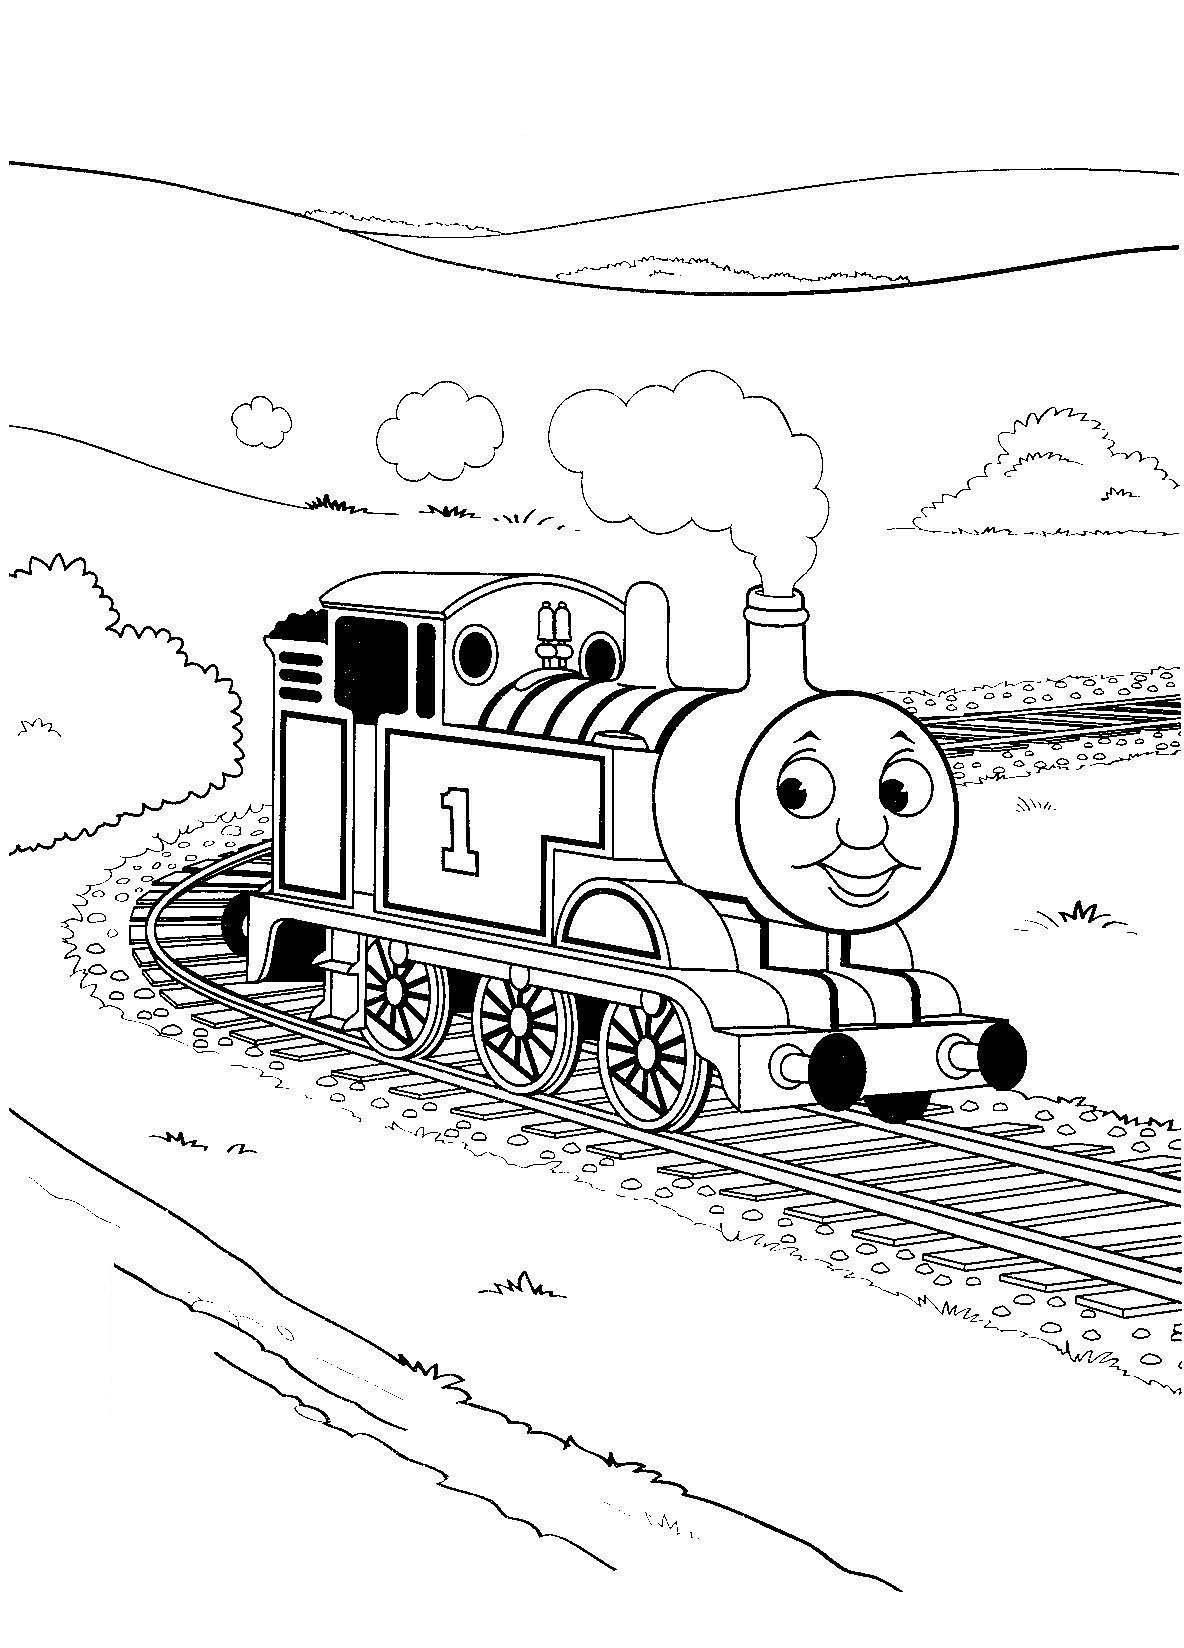 Thomas the tank engine coloring pages to download and print for free